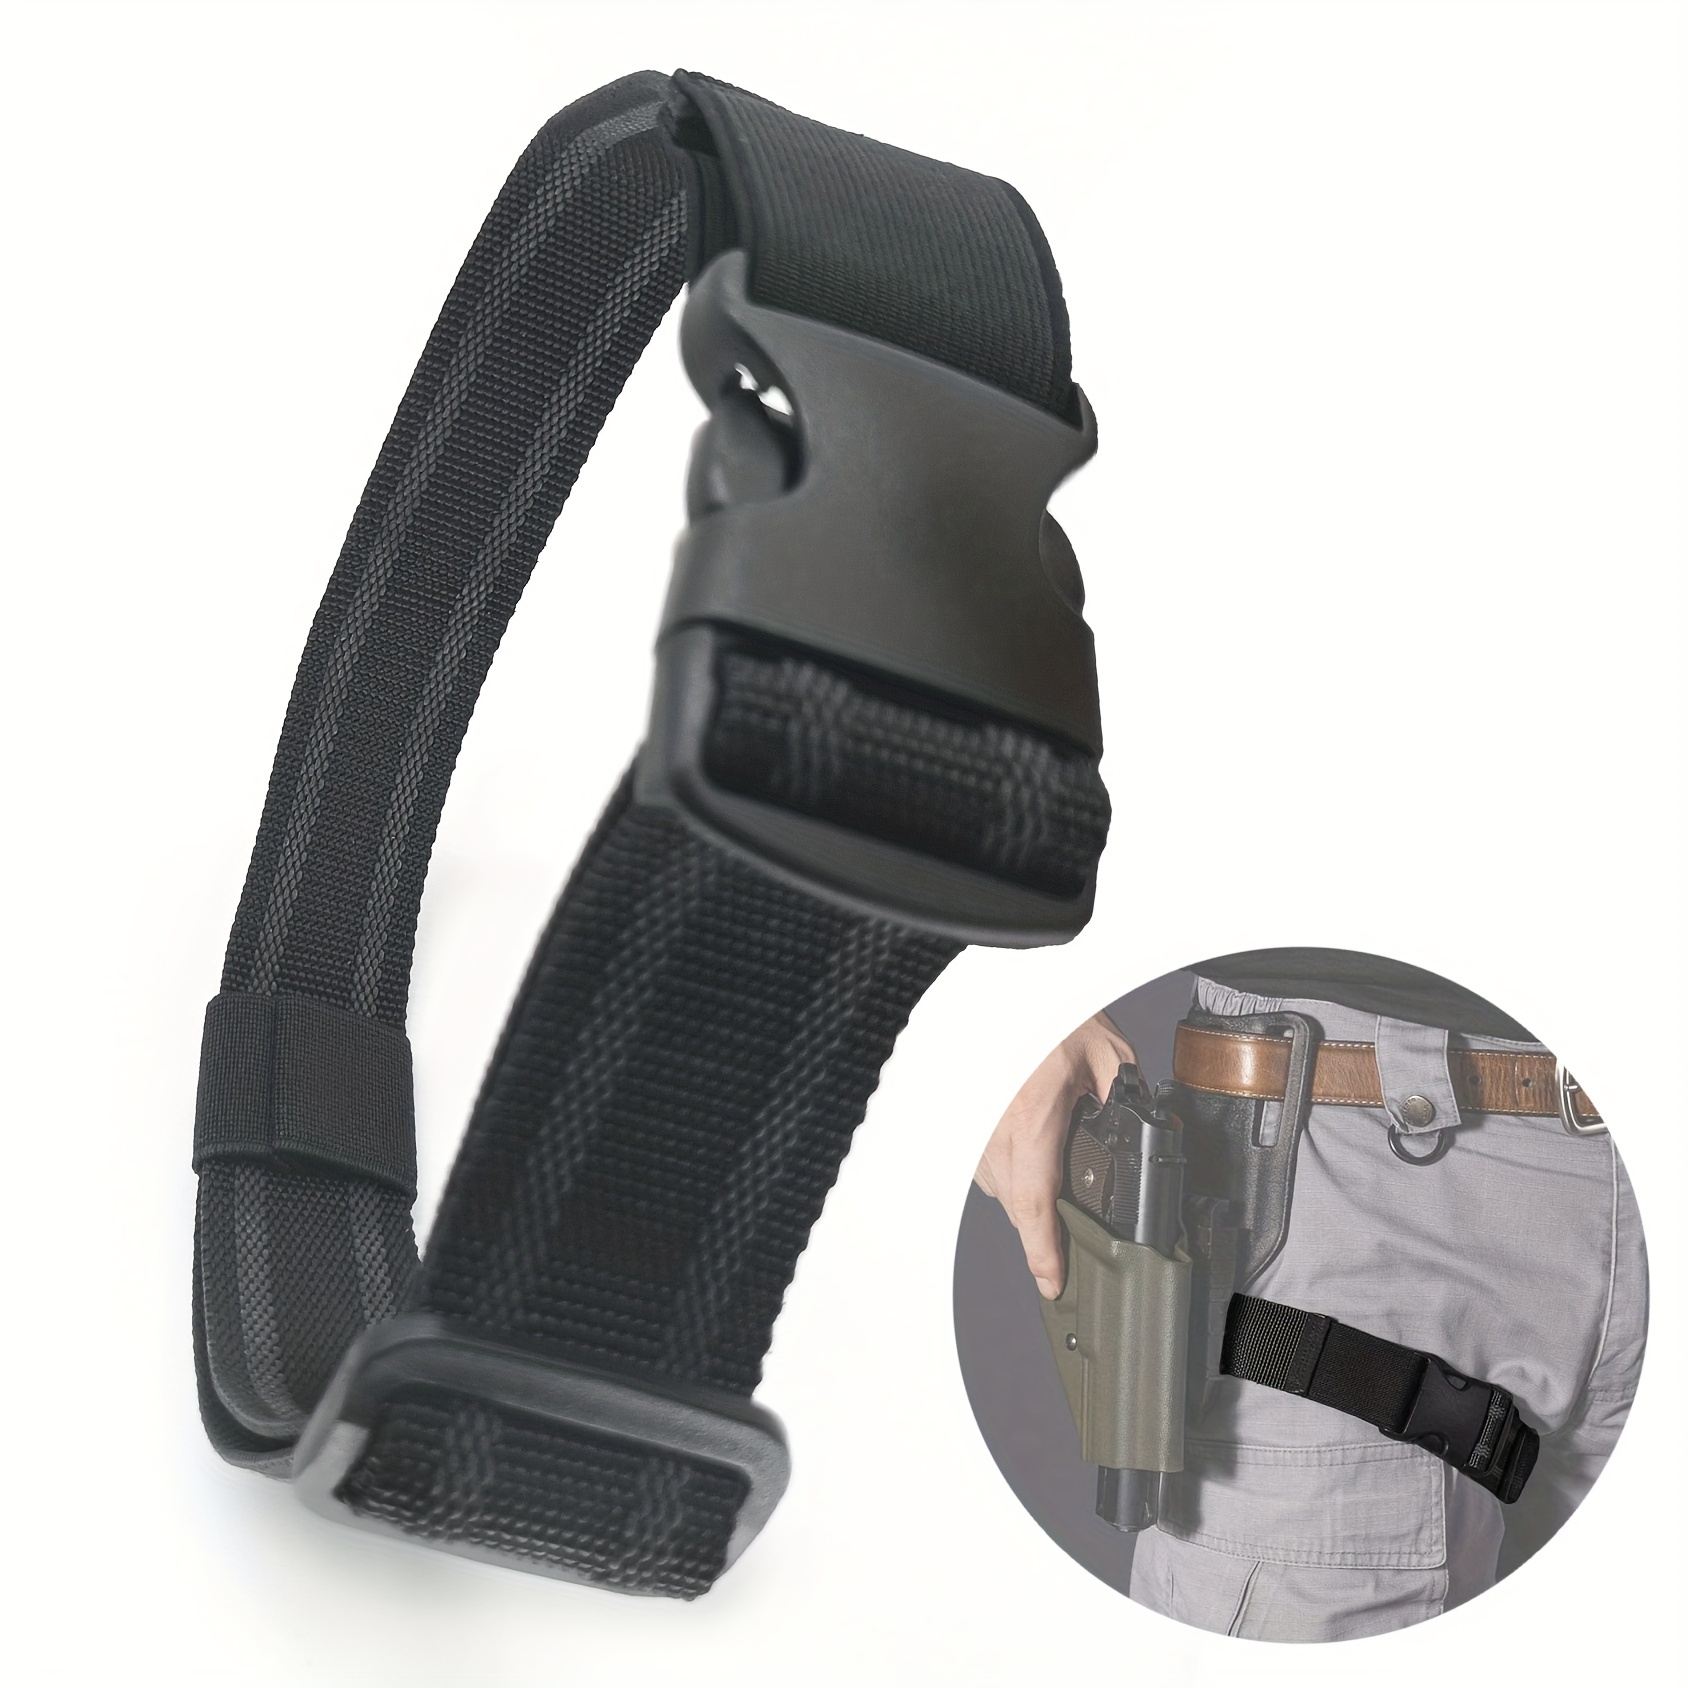 Tactical Strap Elastic Band for Thigh Holster Leg Hanger Quick Pull Draw